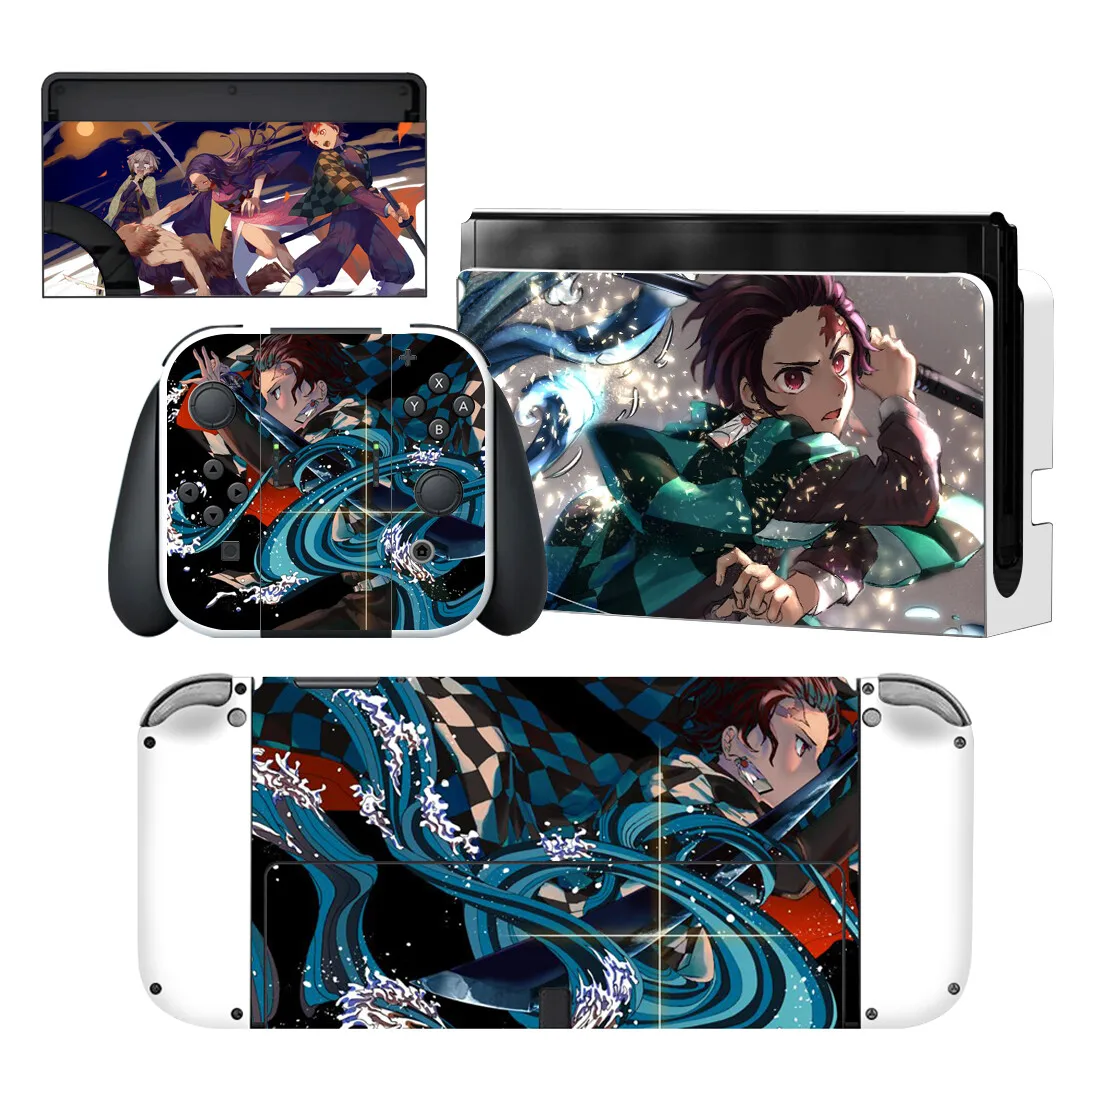 Demon Slayer Tanjiro Nintendoswitch Skin Cover Sticker Decal for Nintendo Switch OLED Console Joy-con Controller Dock Skin Vinyl